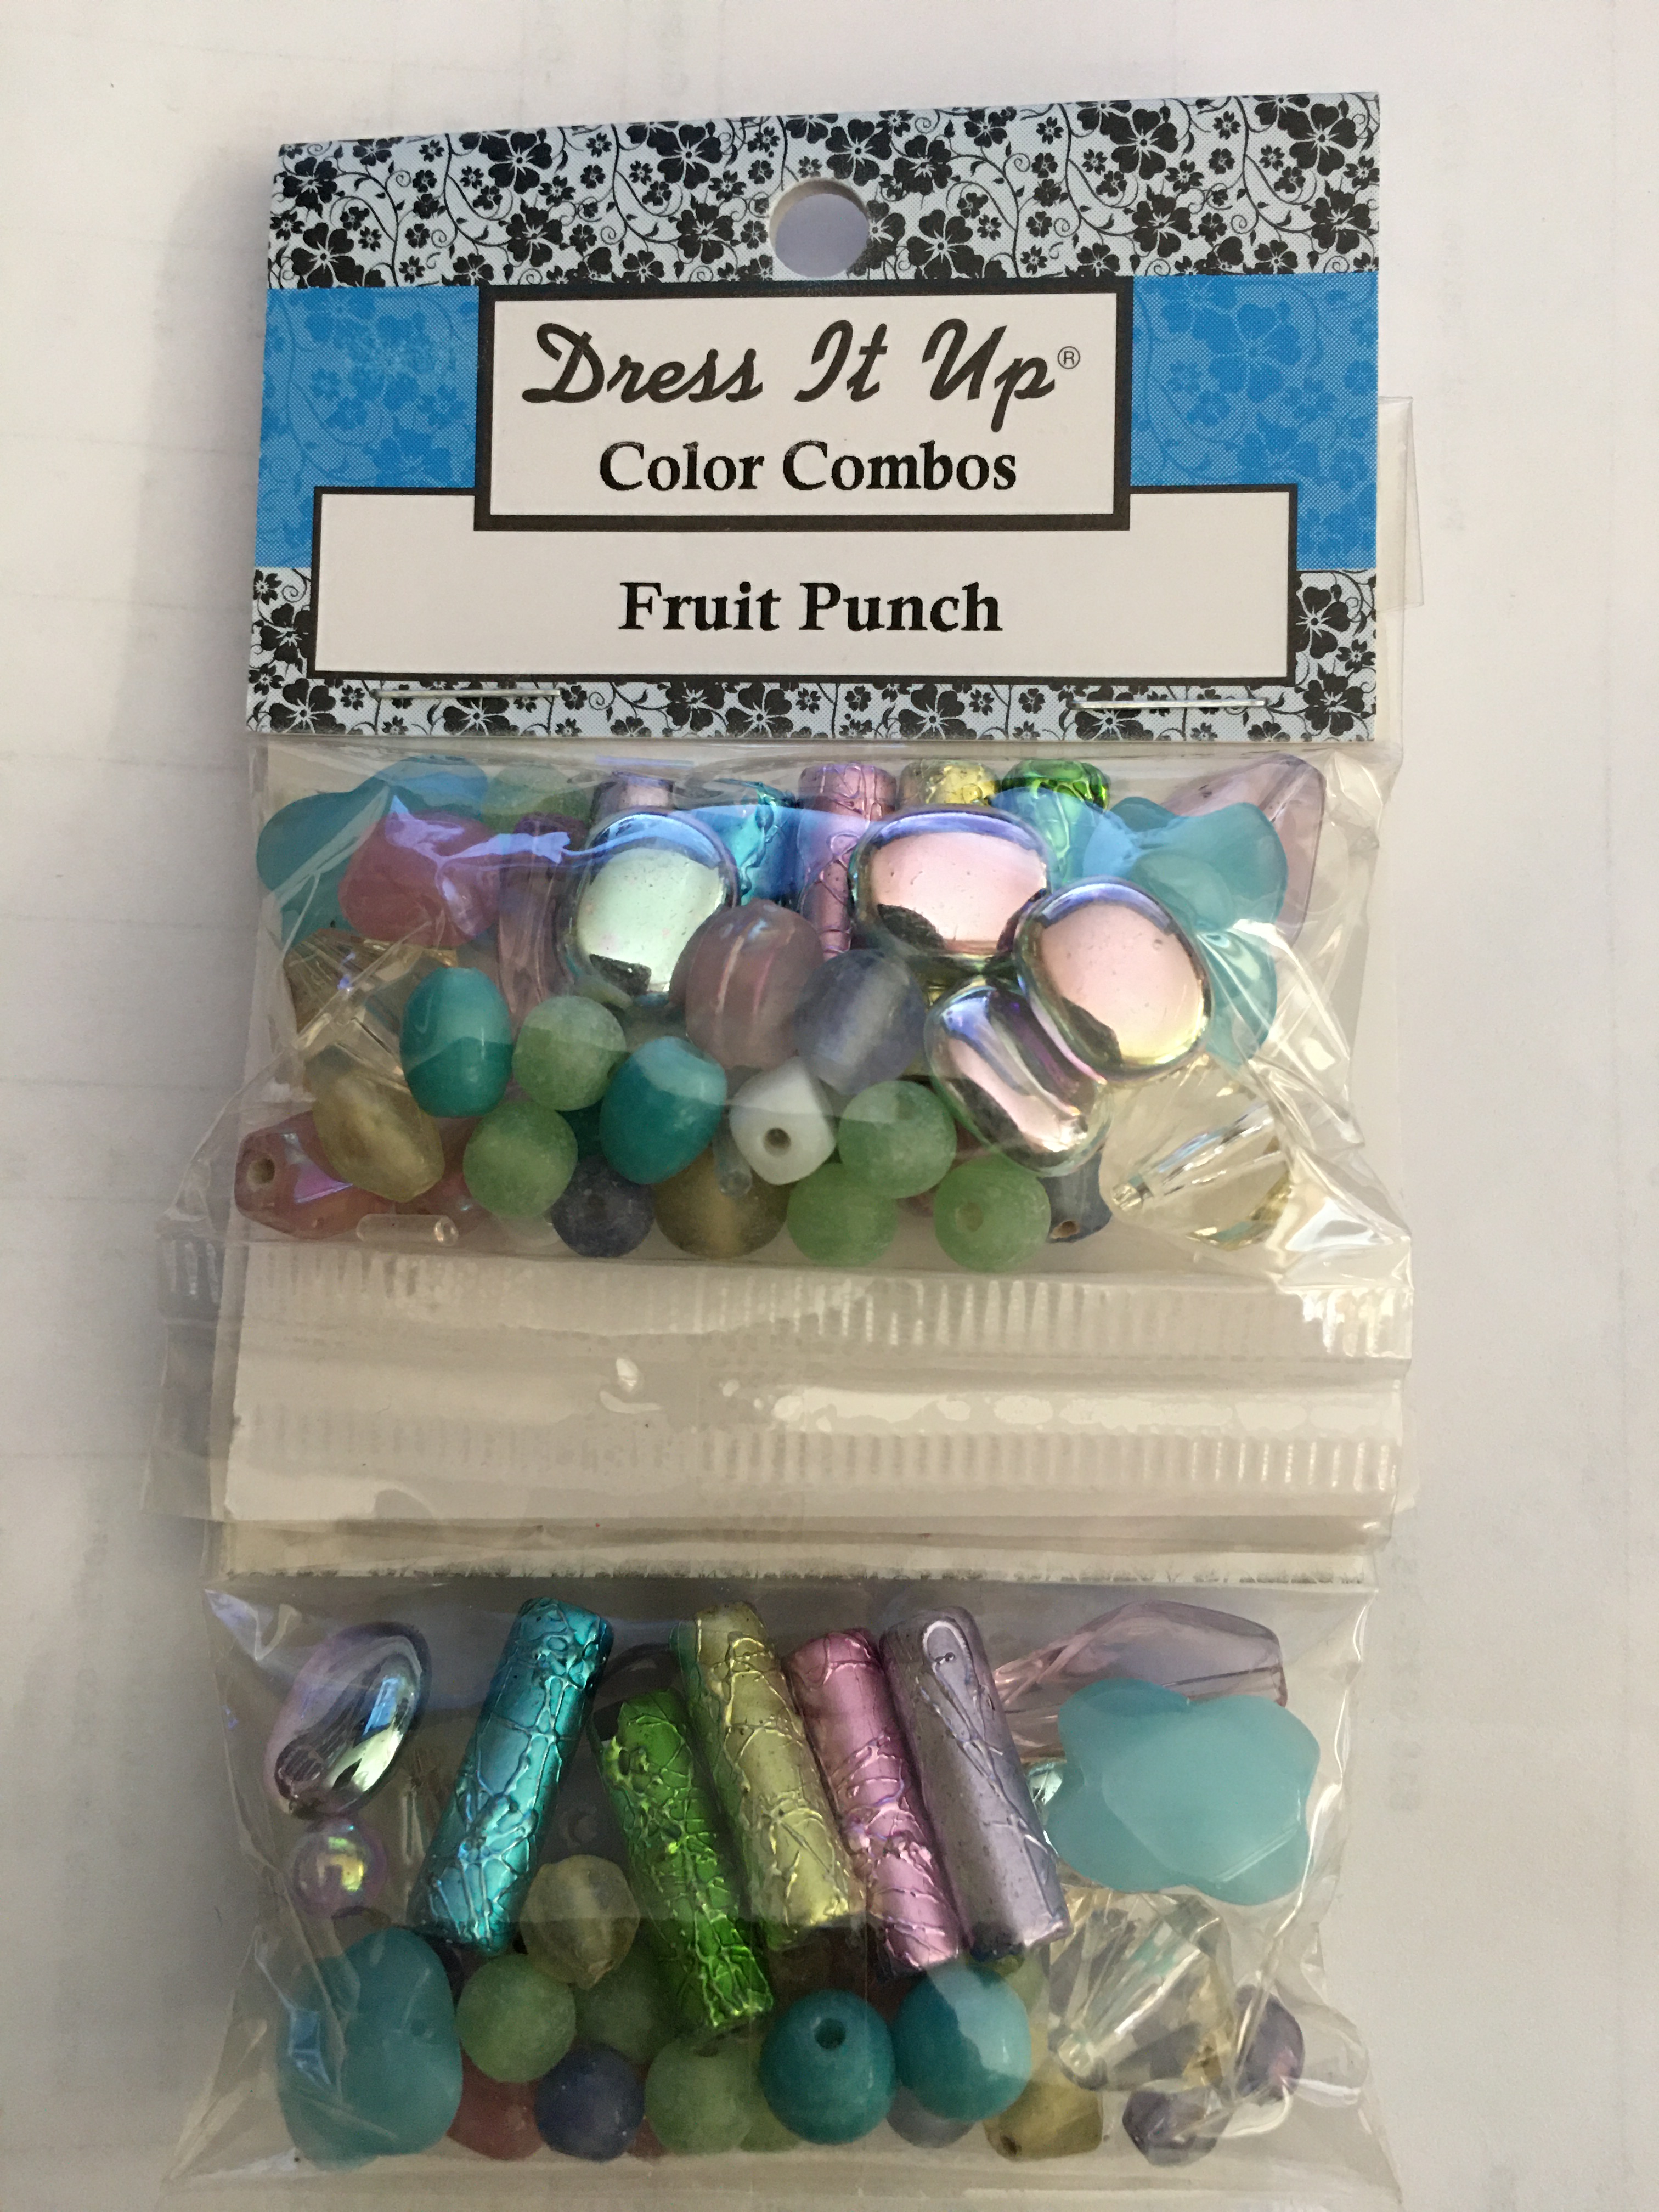 Dress it up Beads - Color Combo Fruit Punch